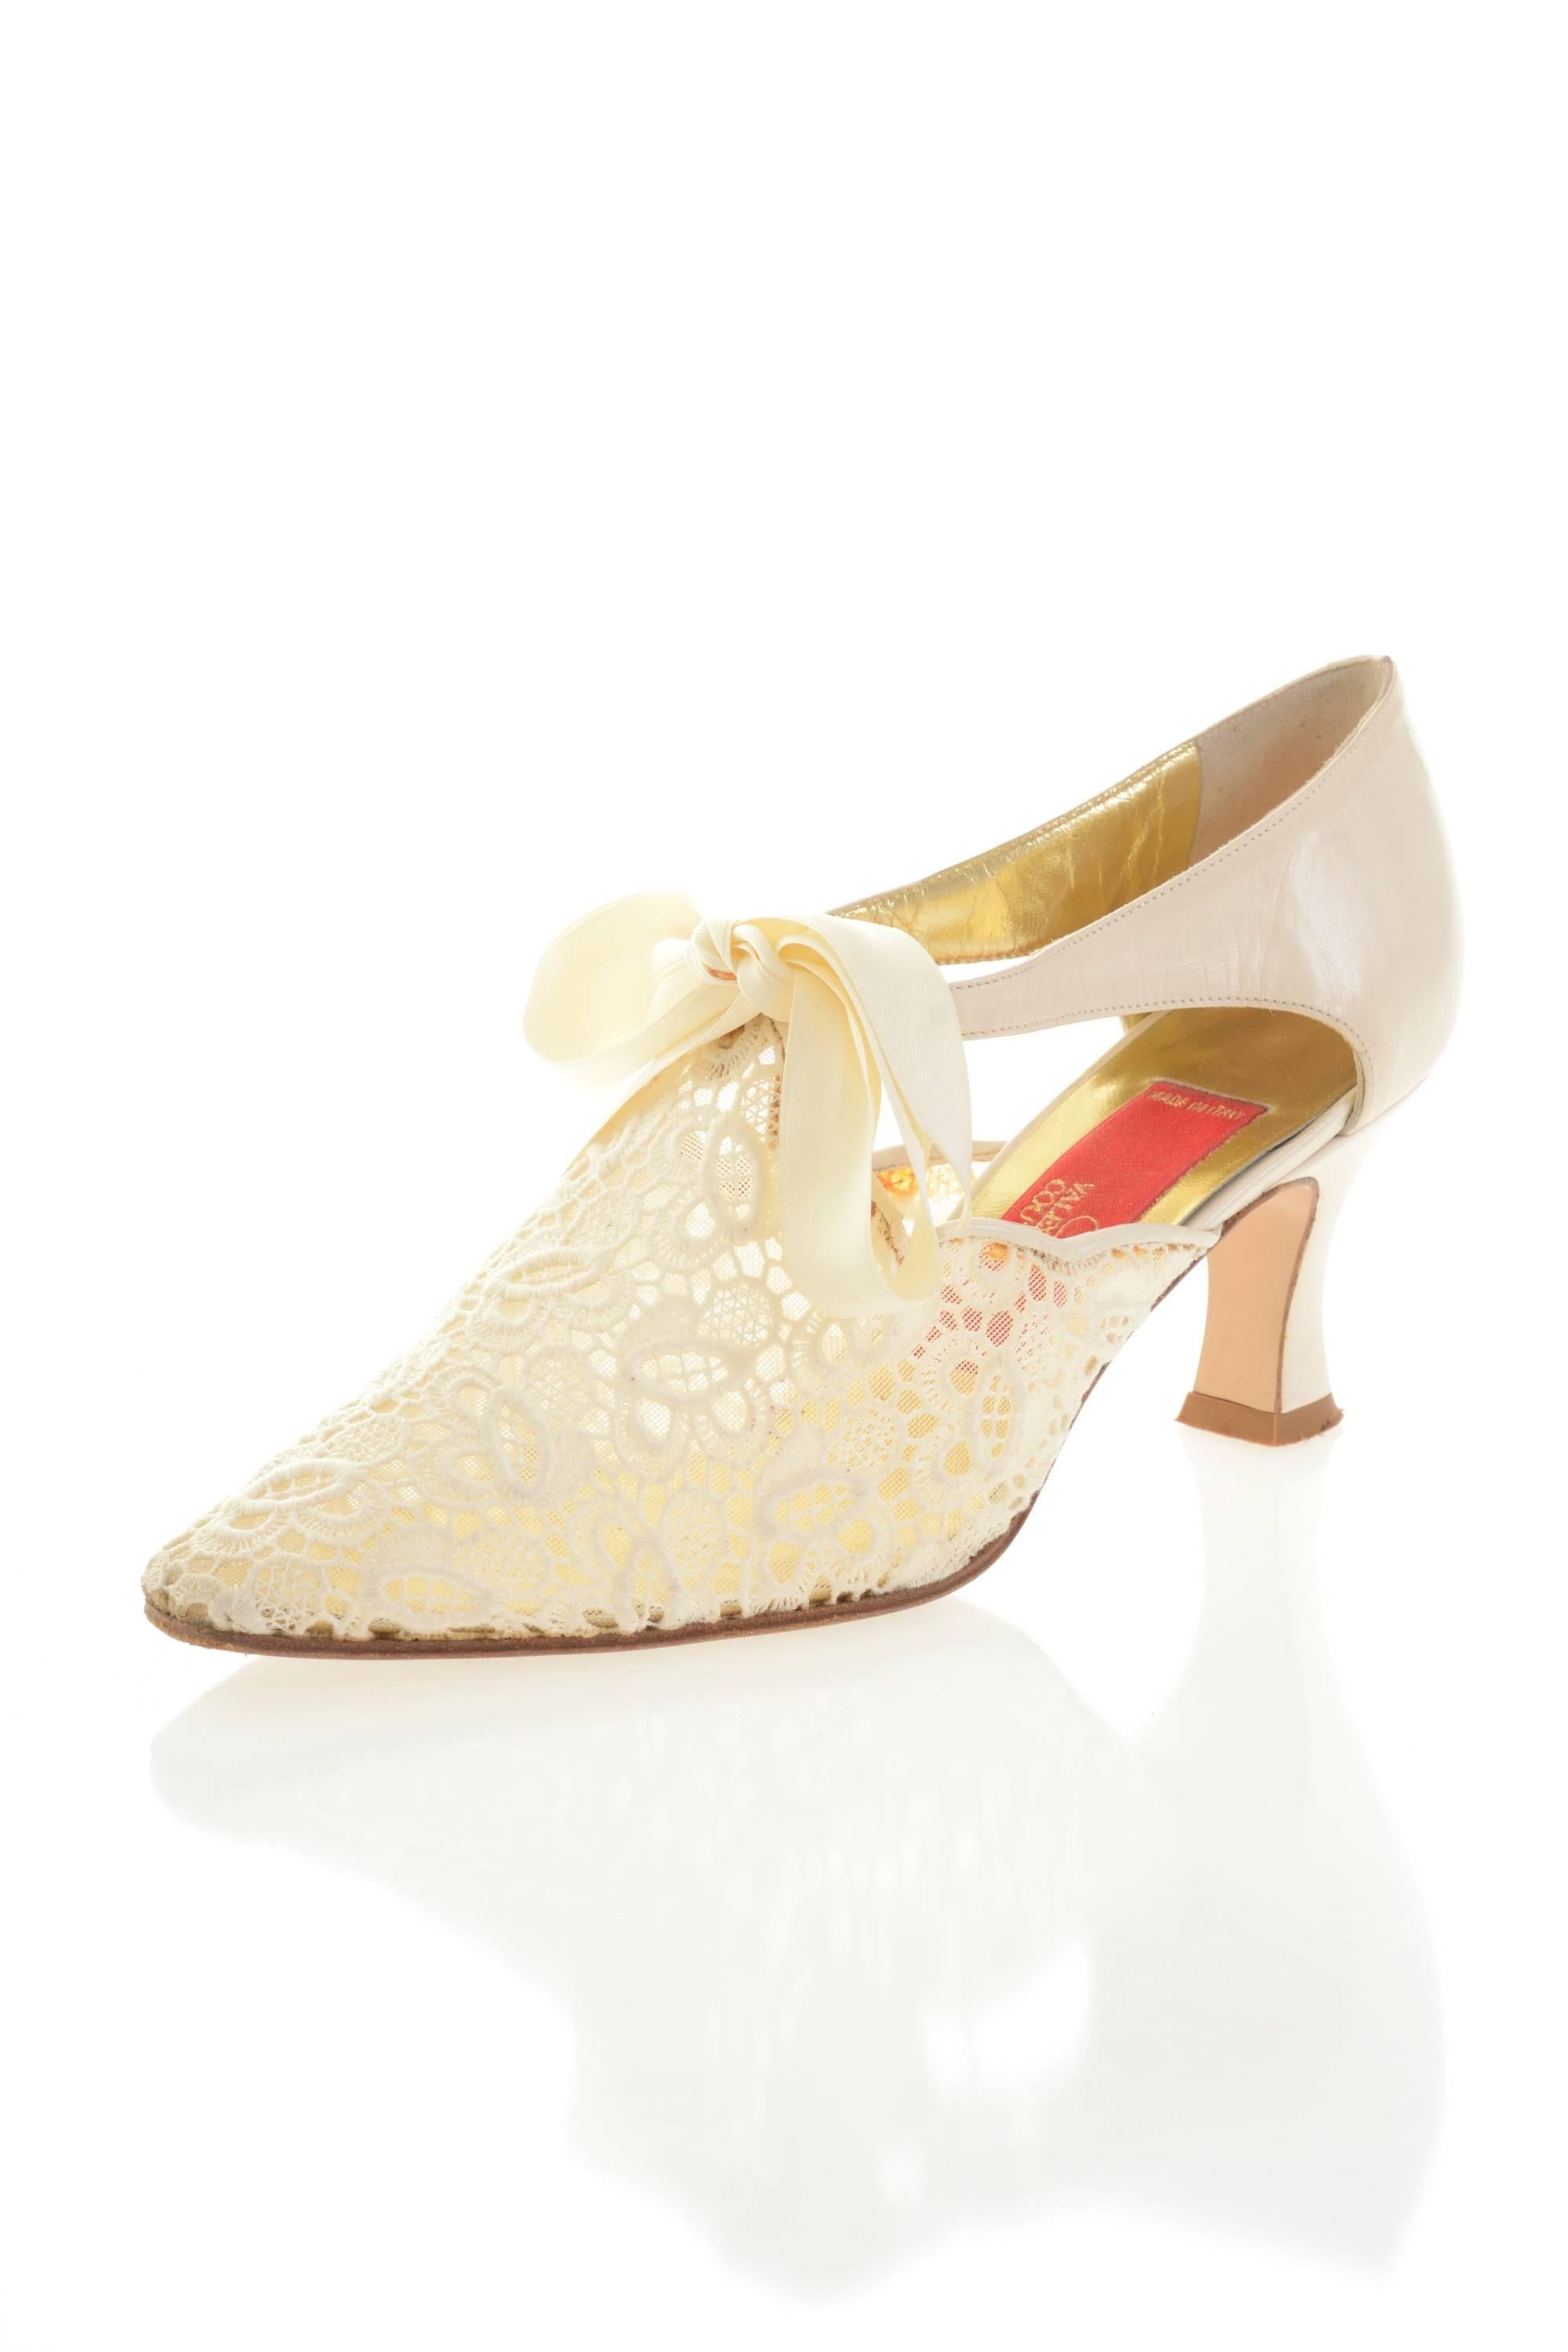 1980s VALENTINO COUTURE White Pearl Lace Italian Shoes 2